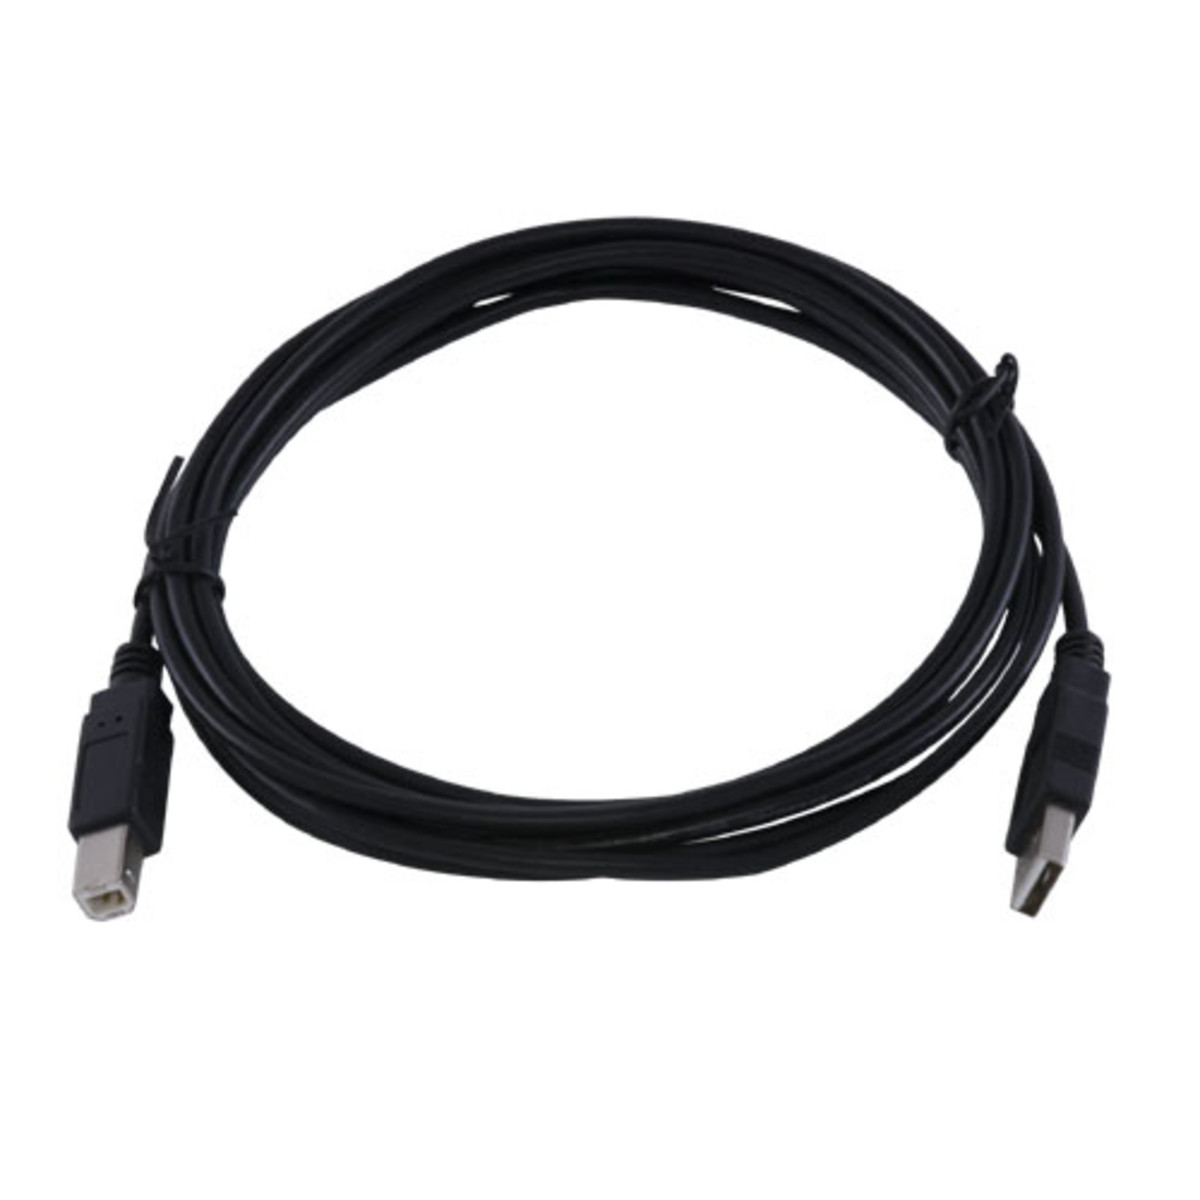 USB 2.0 A (M) to B (M) Cable